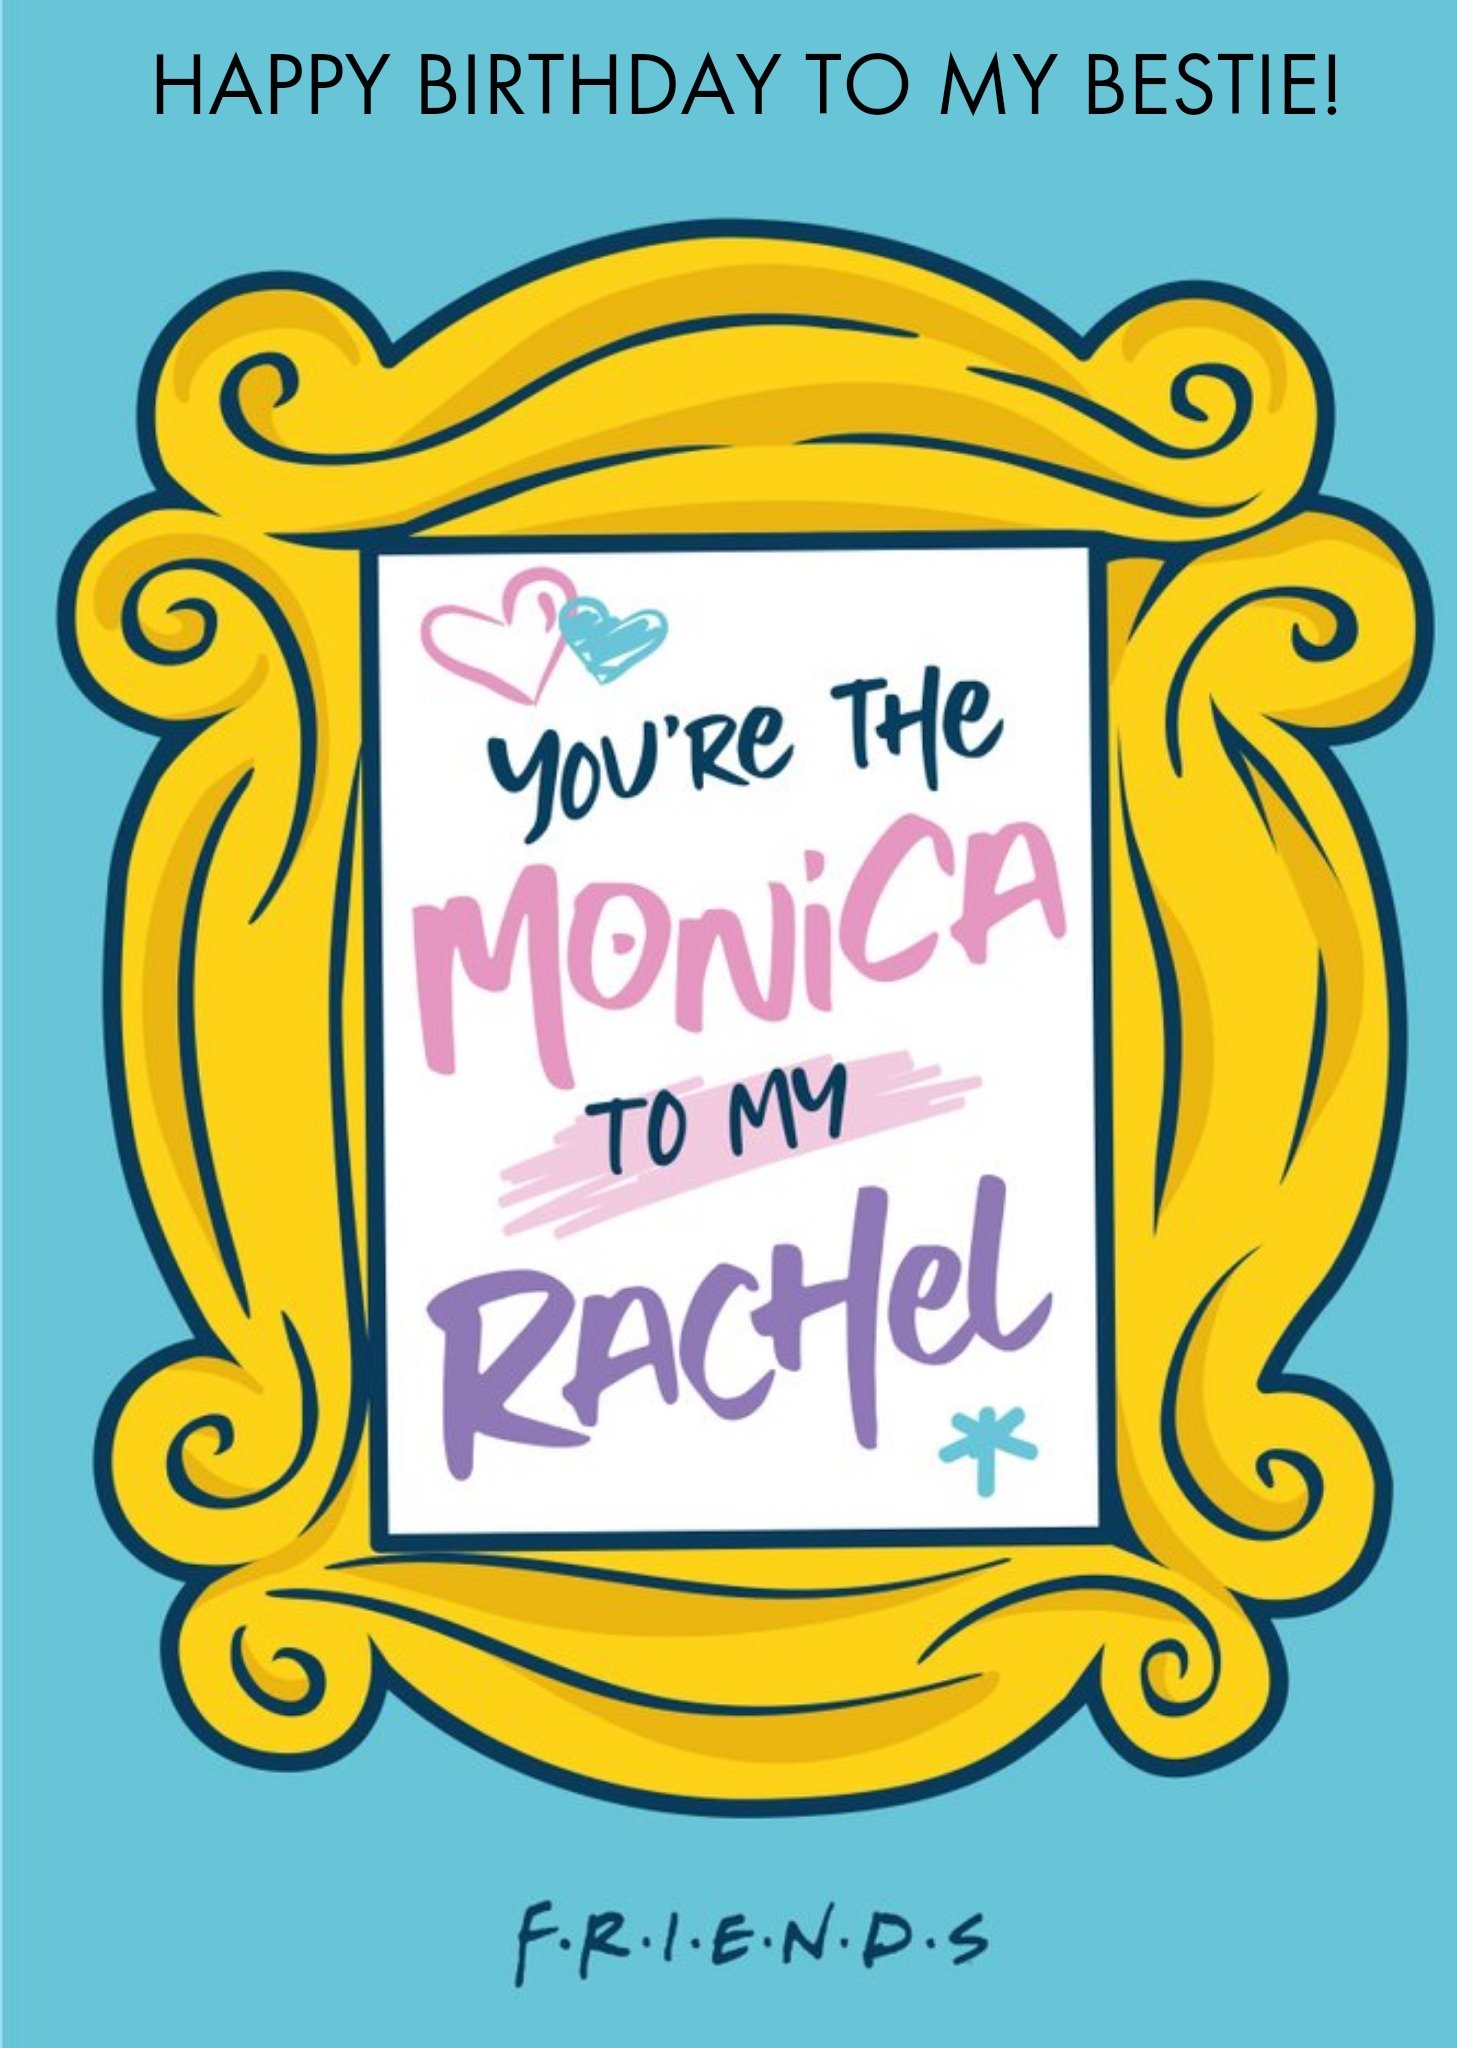 Friends (Tv Show) Friends Tv You Are The Monica To My Rachel Bestie Birthday Card, Large